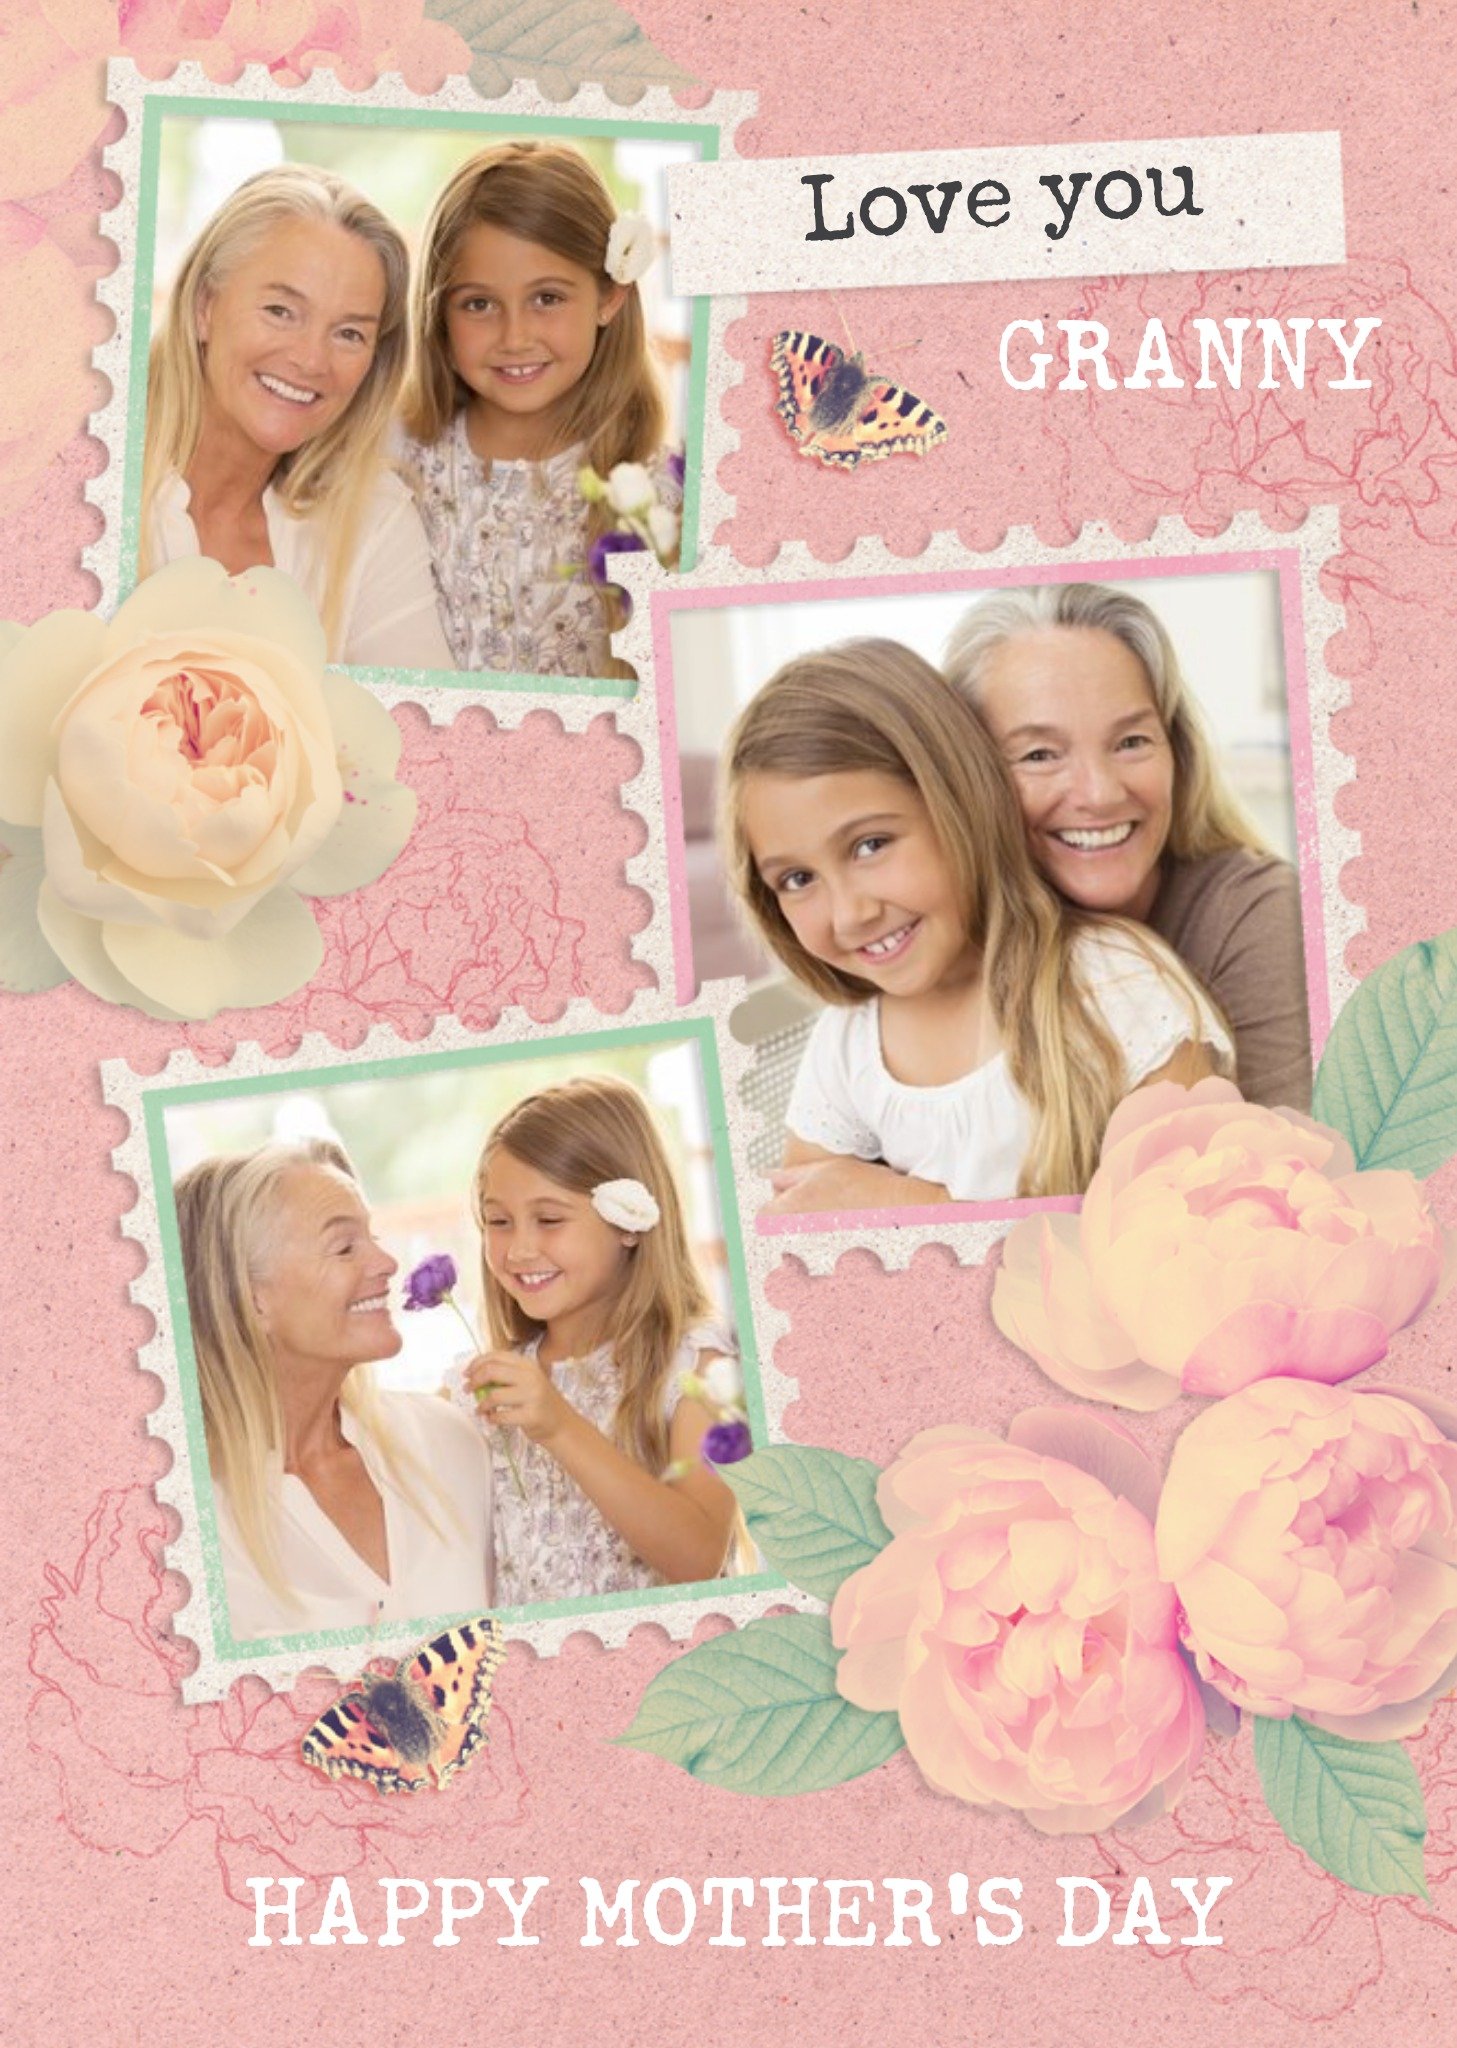 Moonpig Love You Granny Photo Upload Mother's Day Card Ecard